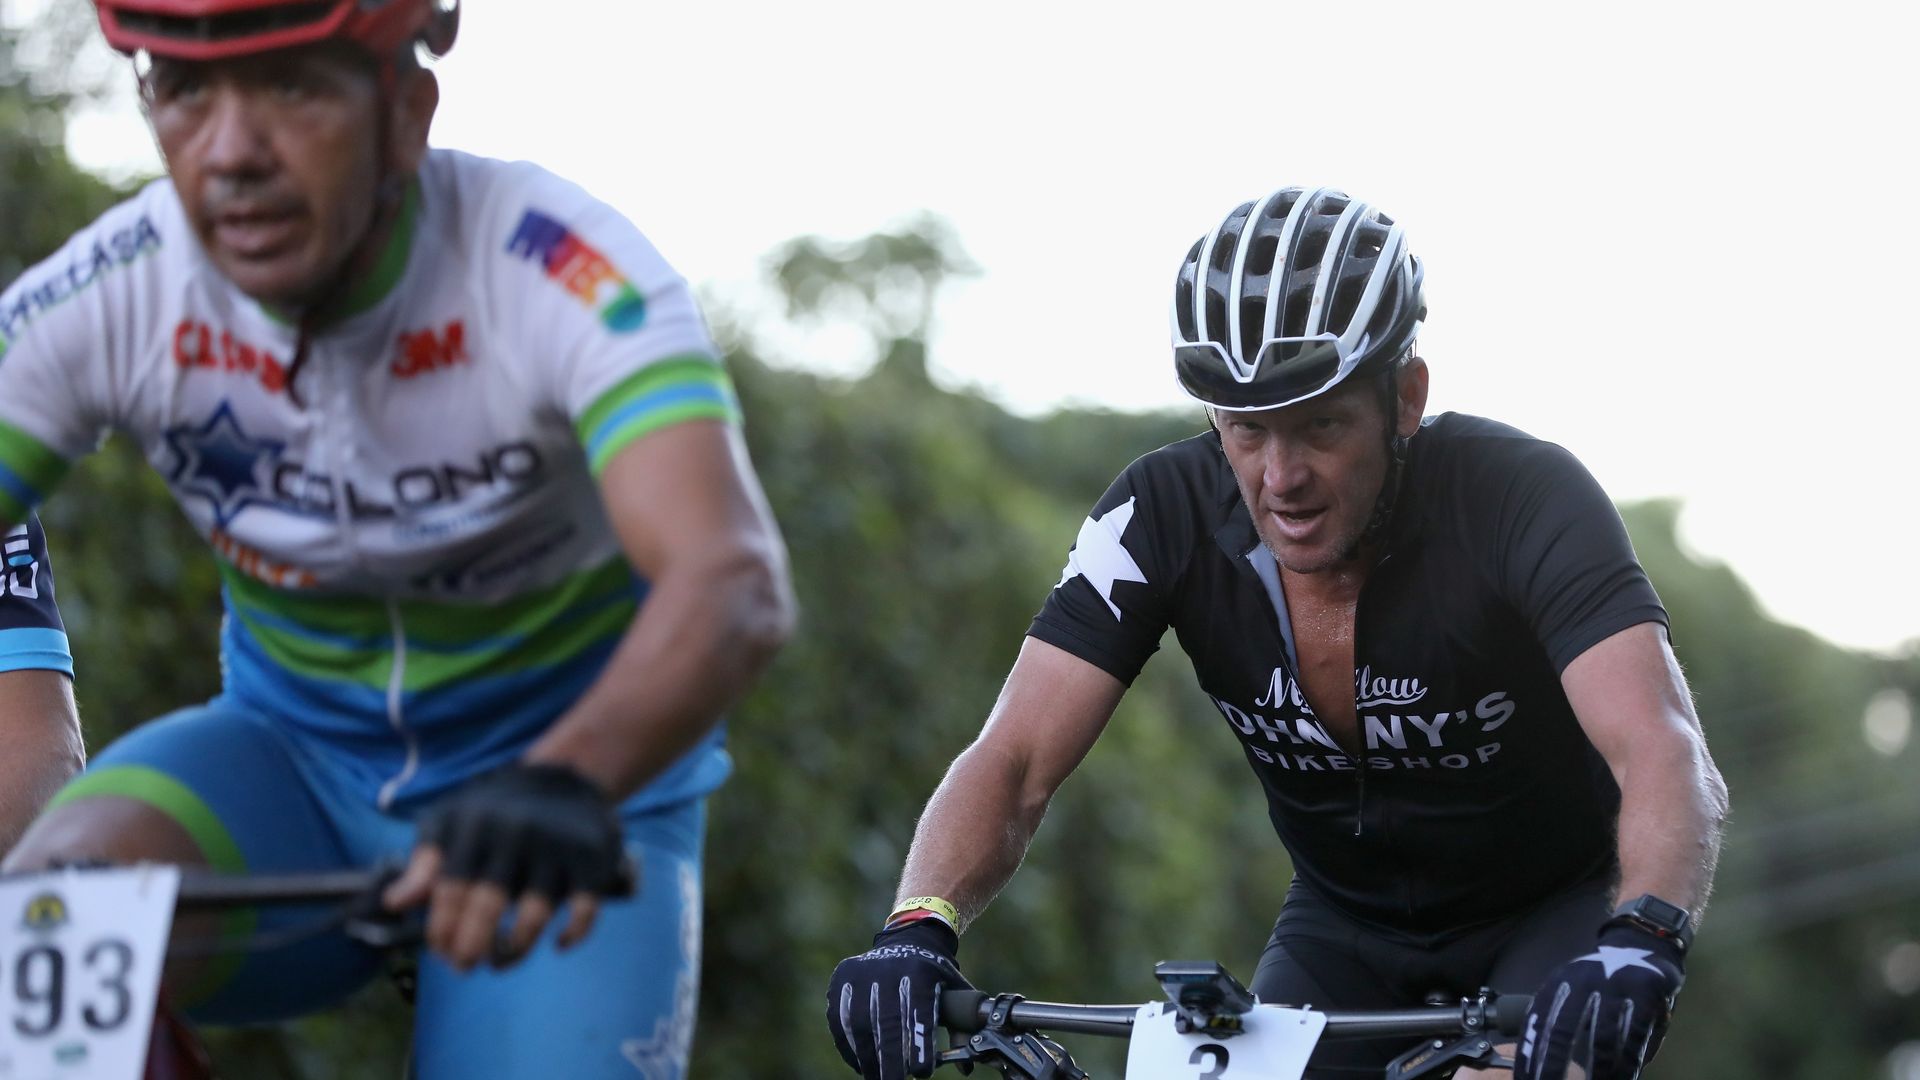 Lance Armstrong pedals up a mountainside in Costa Rica.